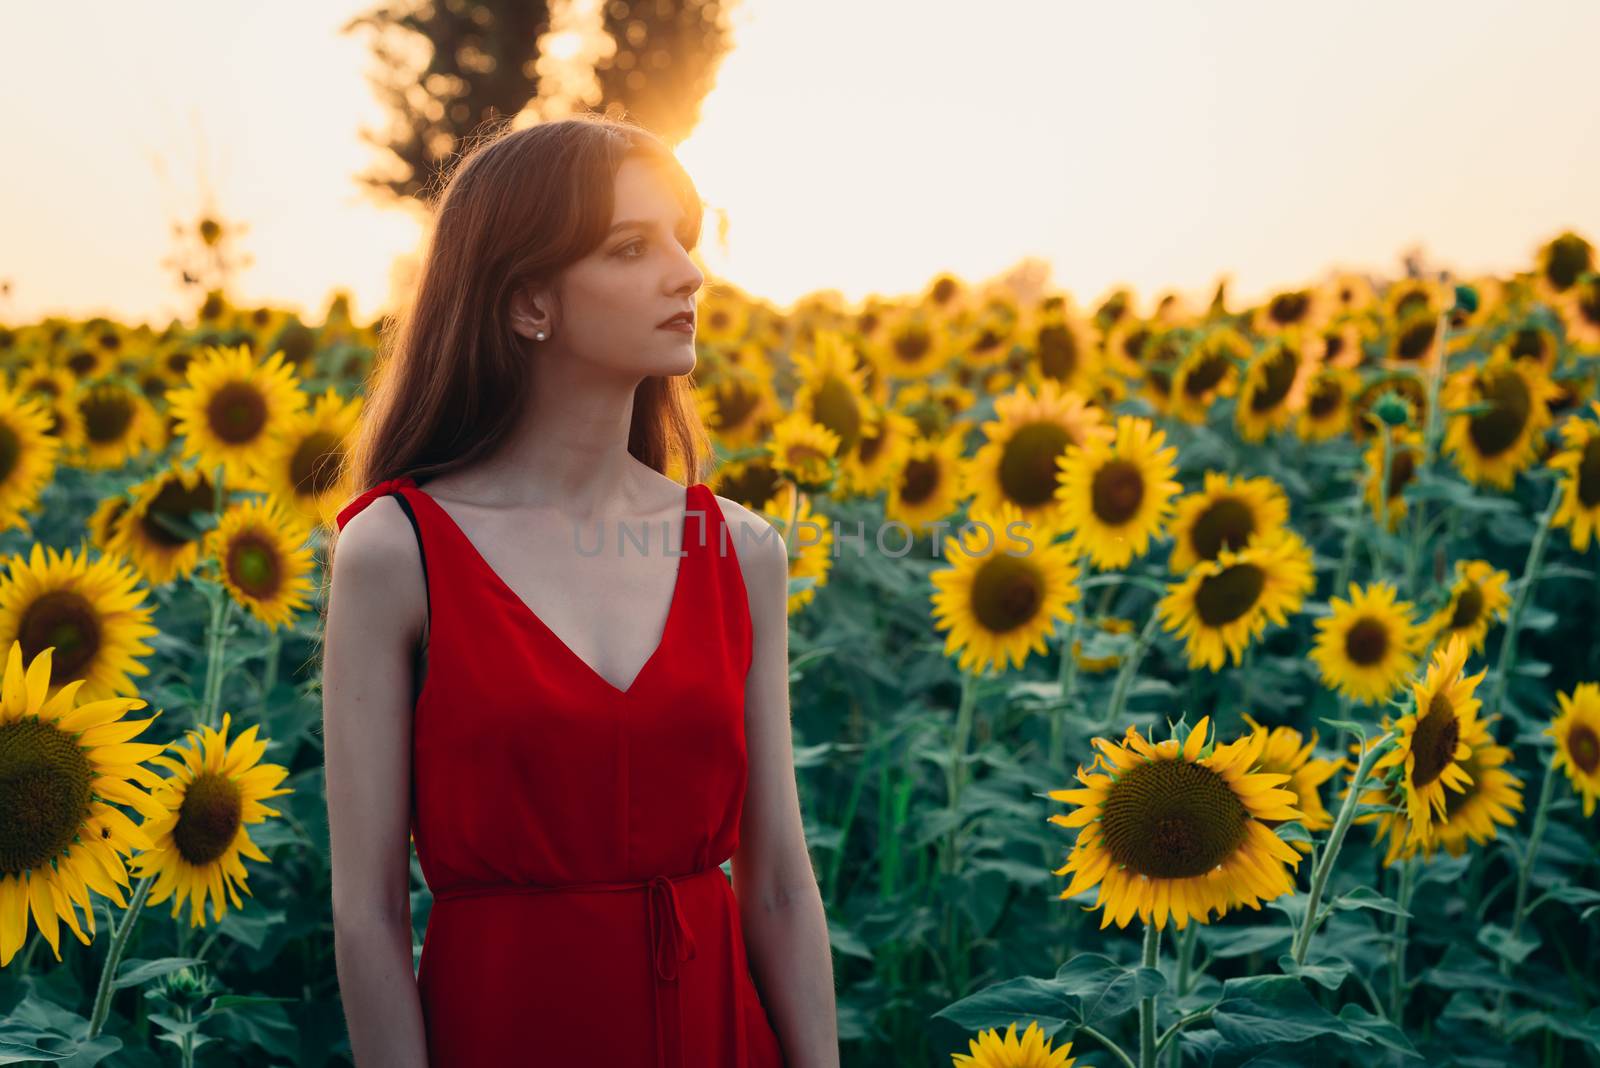 woman with red dress in sunflowers field by Fotoeventis